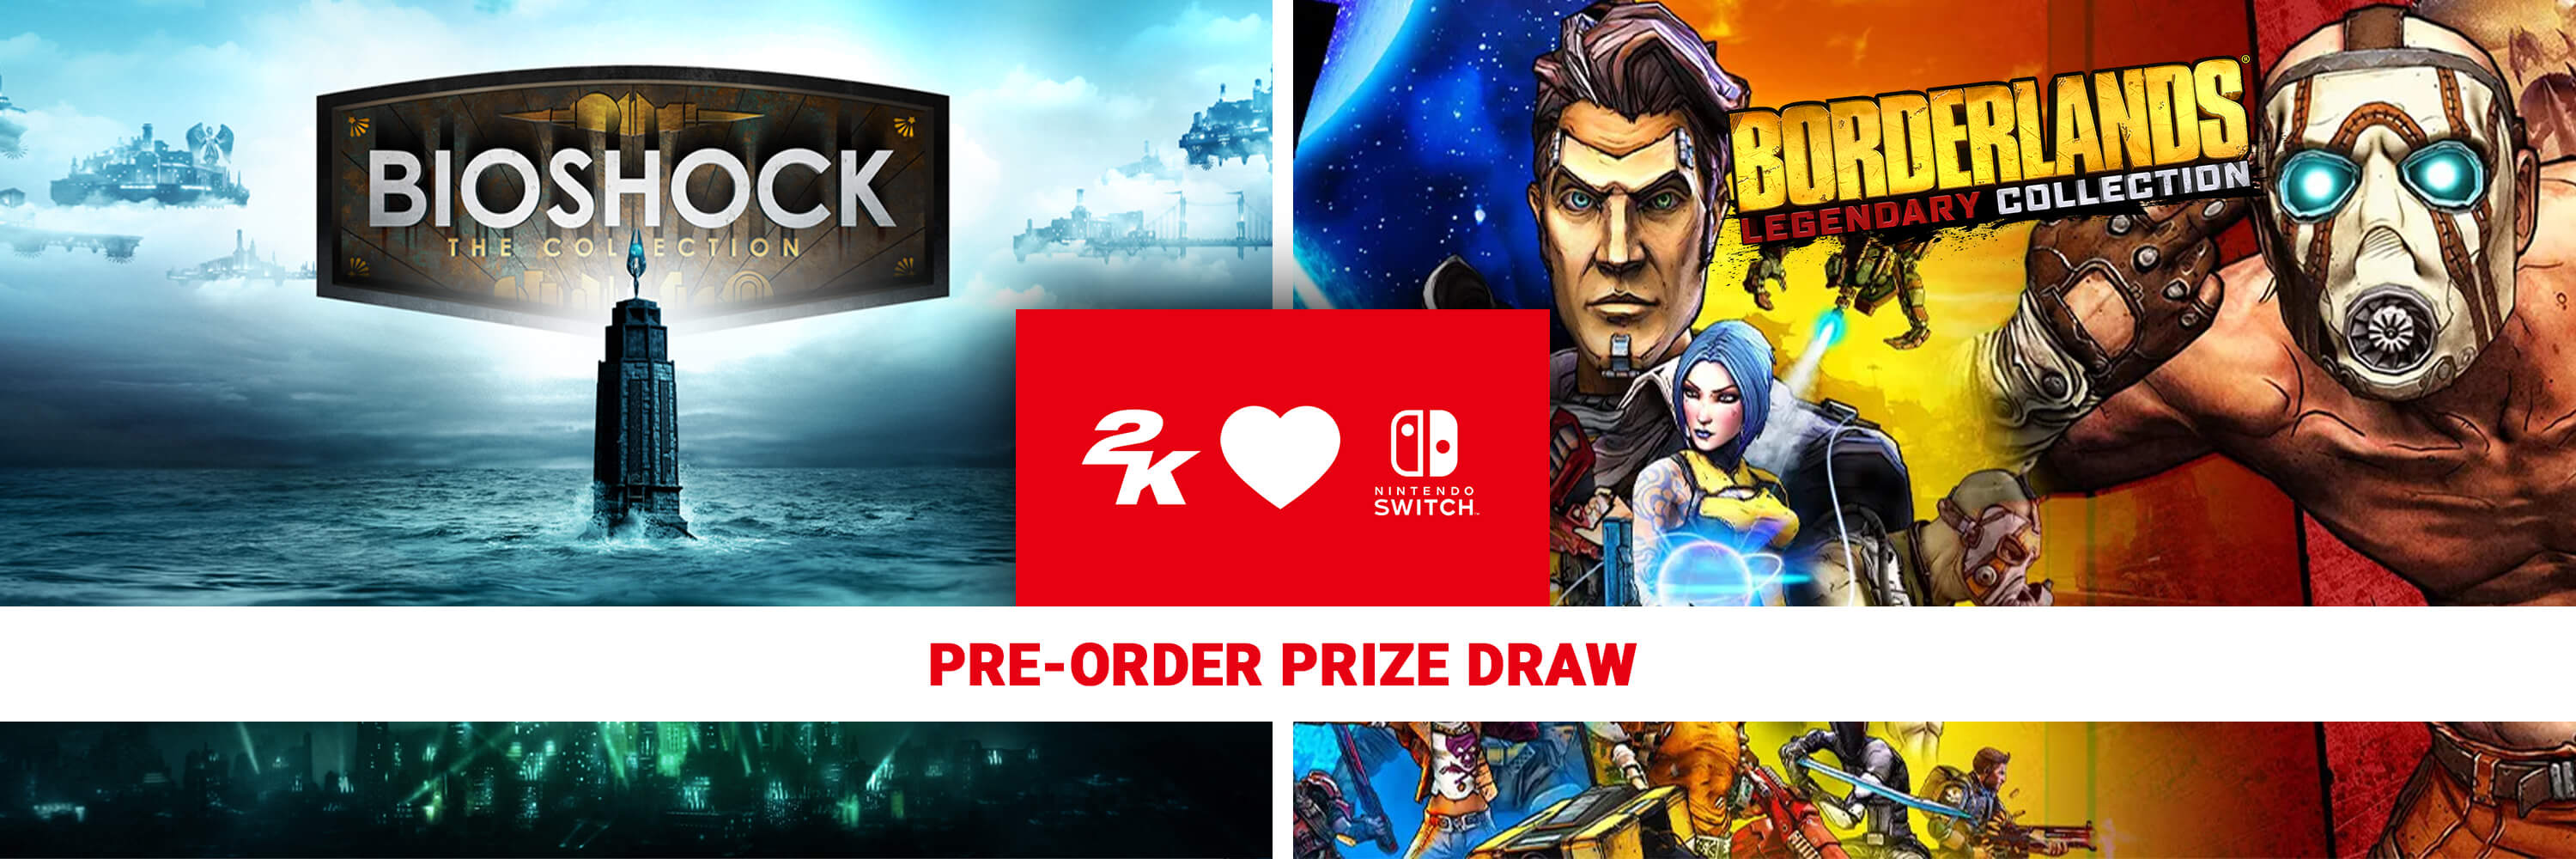 Pre Order Borderlands Legendary Collection Or Bioshock The Collection For A Chance To Win Prizes Via The Nintendo Uk Store Gonintendo